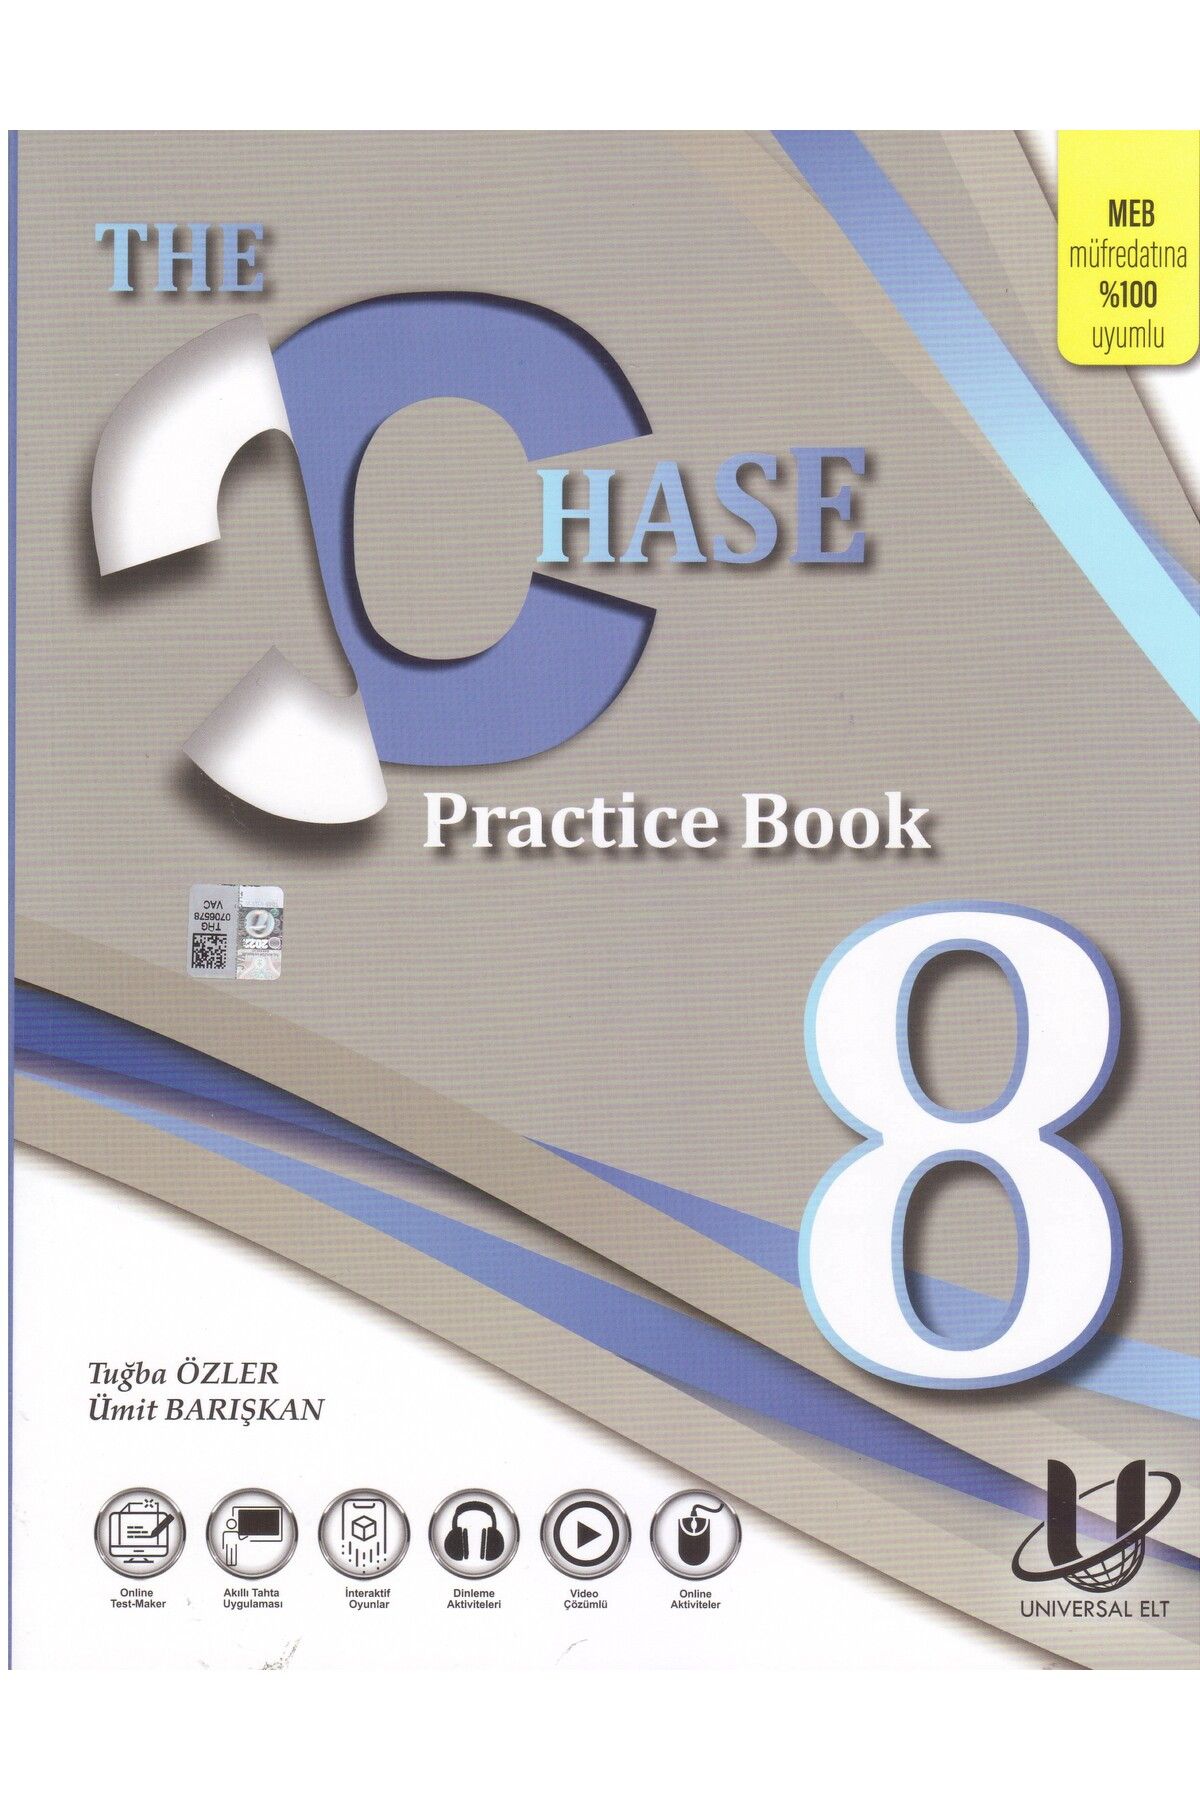 Universal The Chase 8 Practice Book